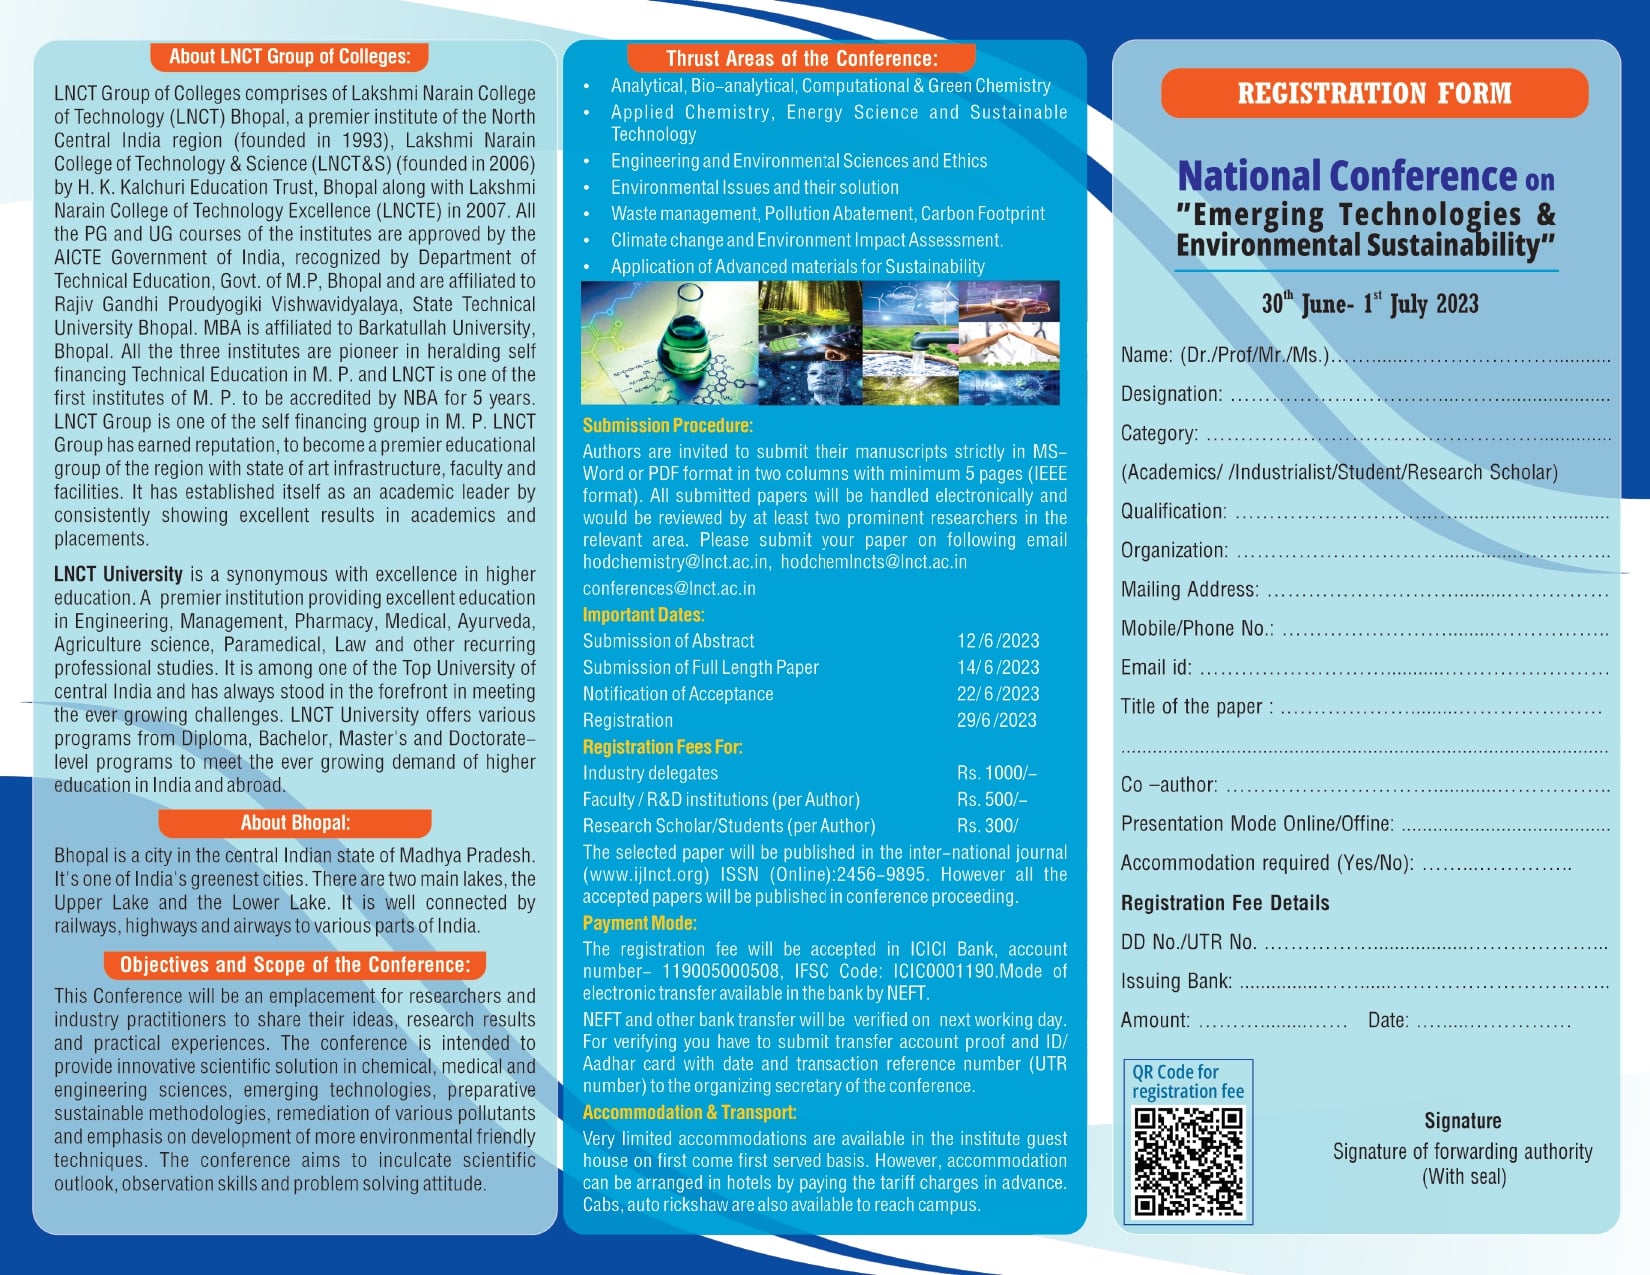 National Conference on Emerging Technologies & Environmental Sustainability 18